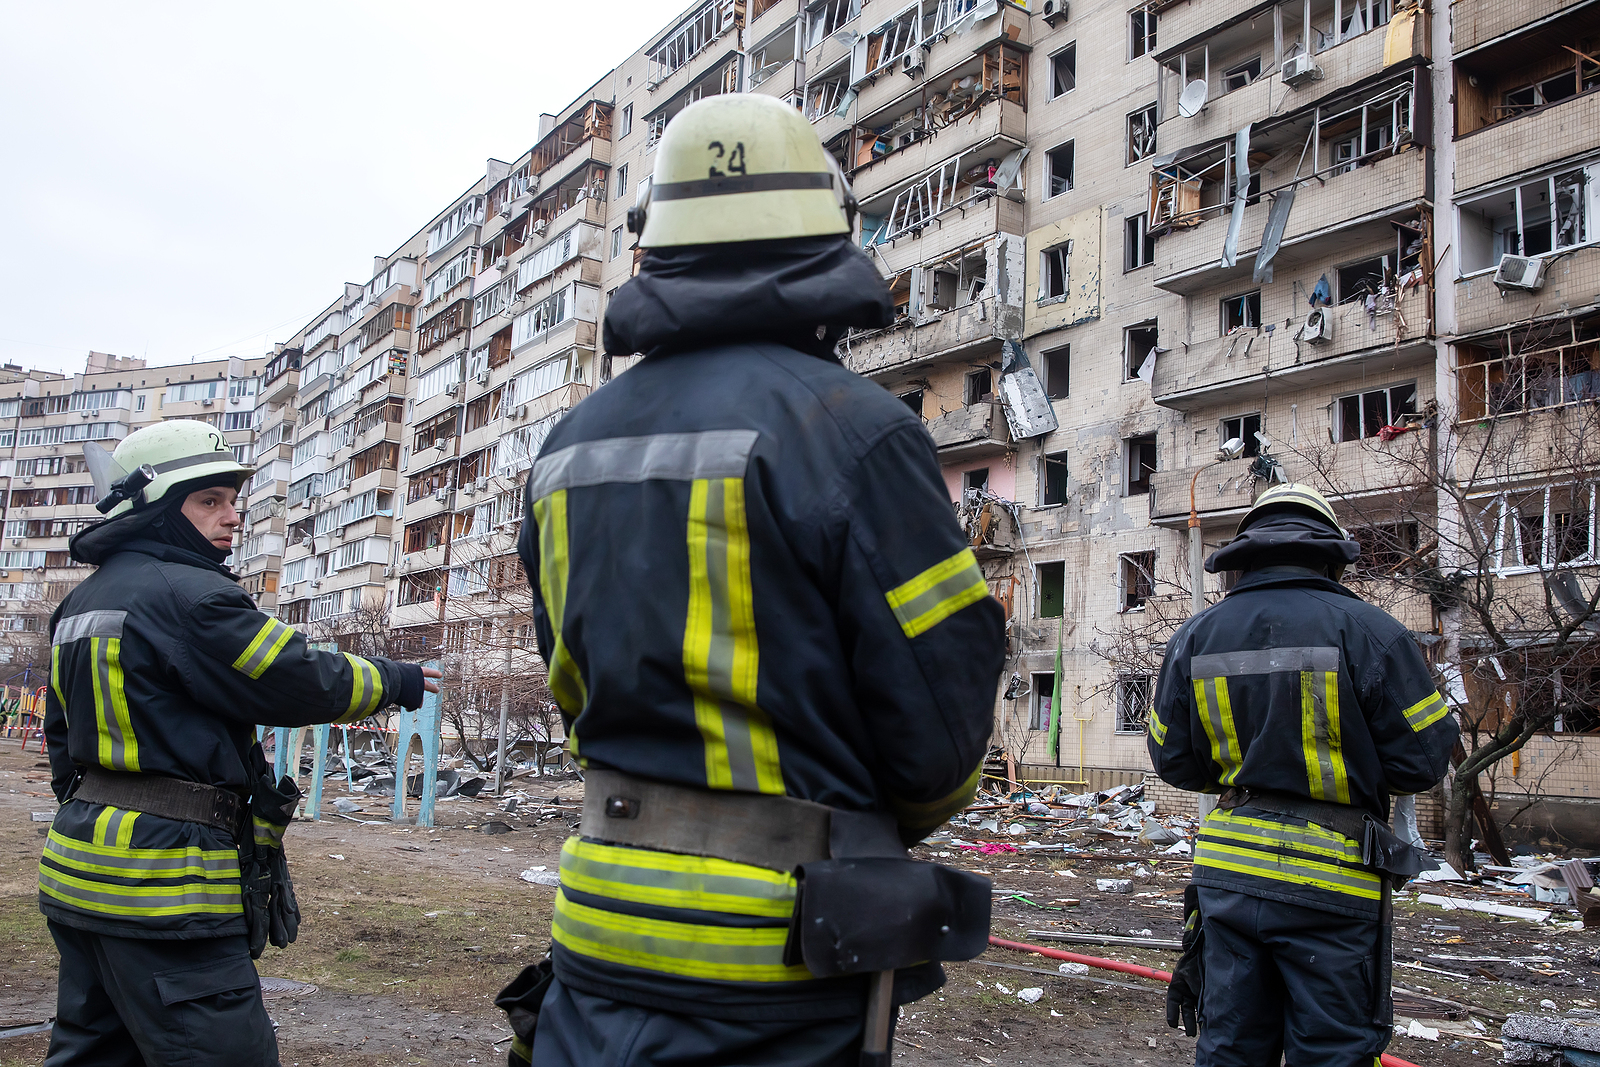 The West should already be planning how to finance Ukraine’s reconstruction